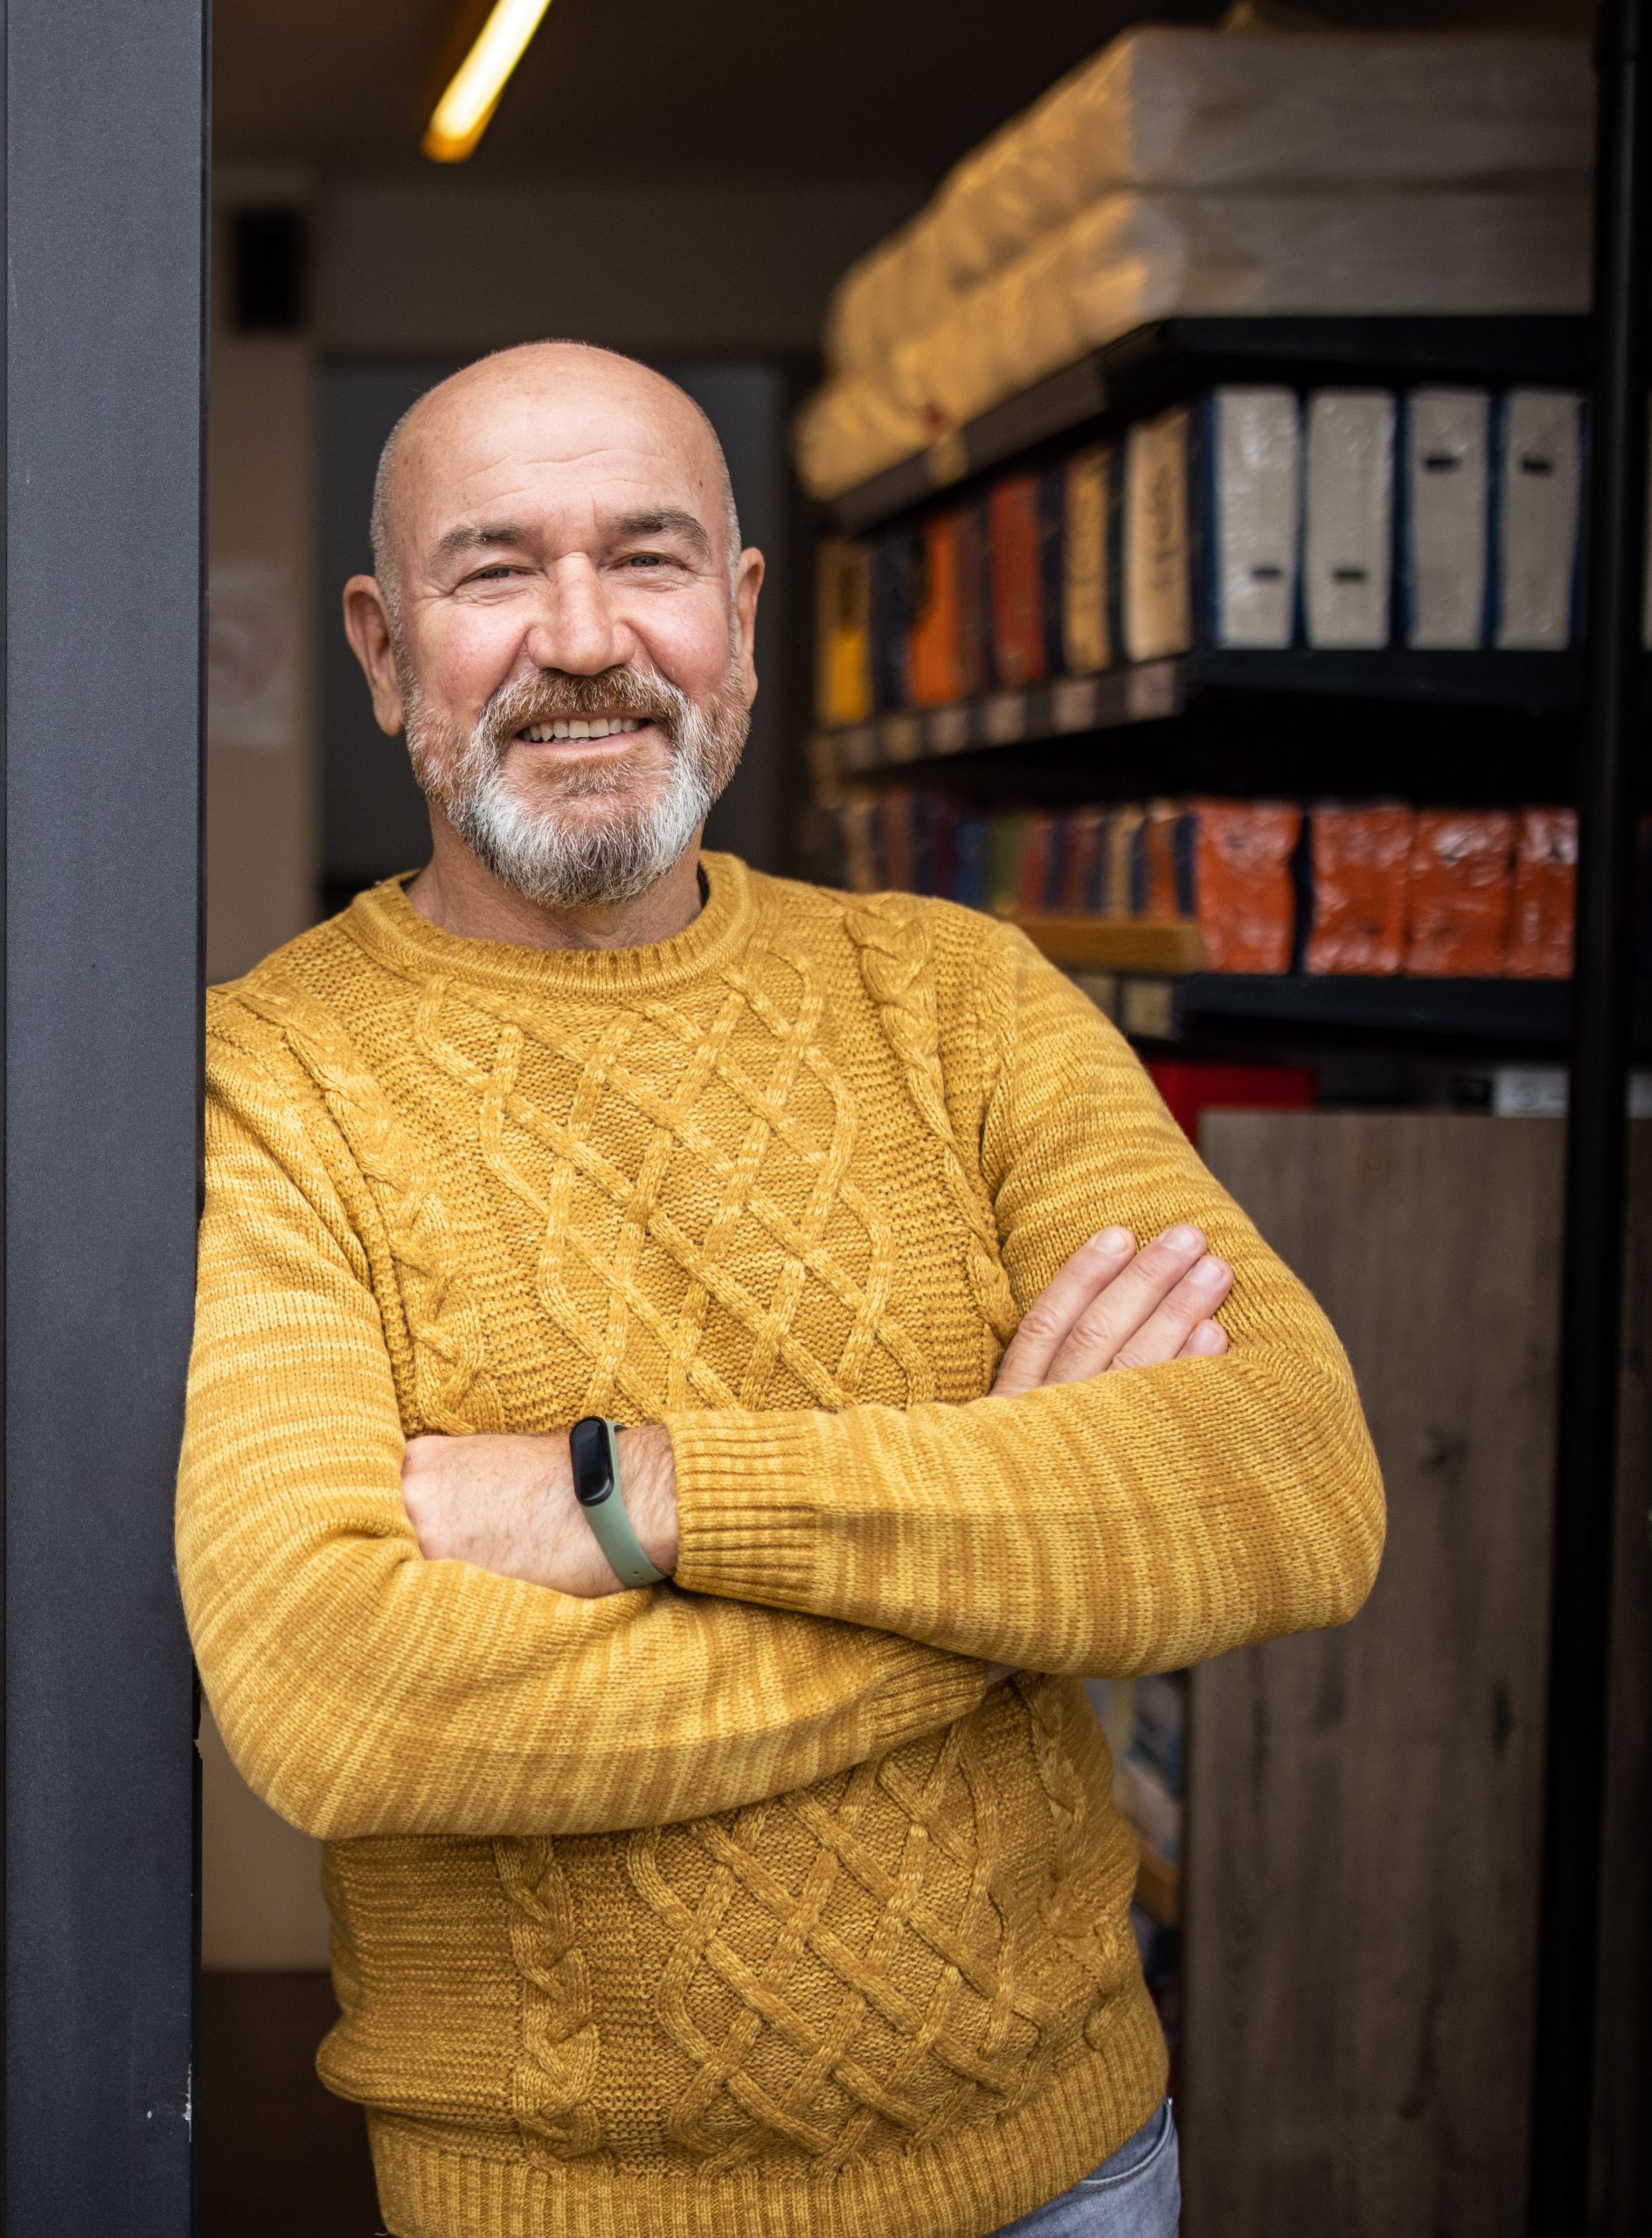 Portrait of proud Caucasian man, a home goods store owner in front of the store